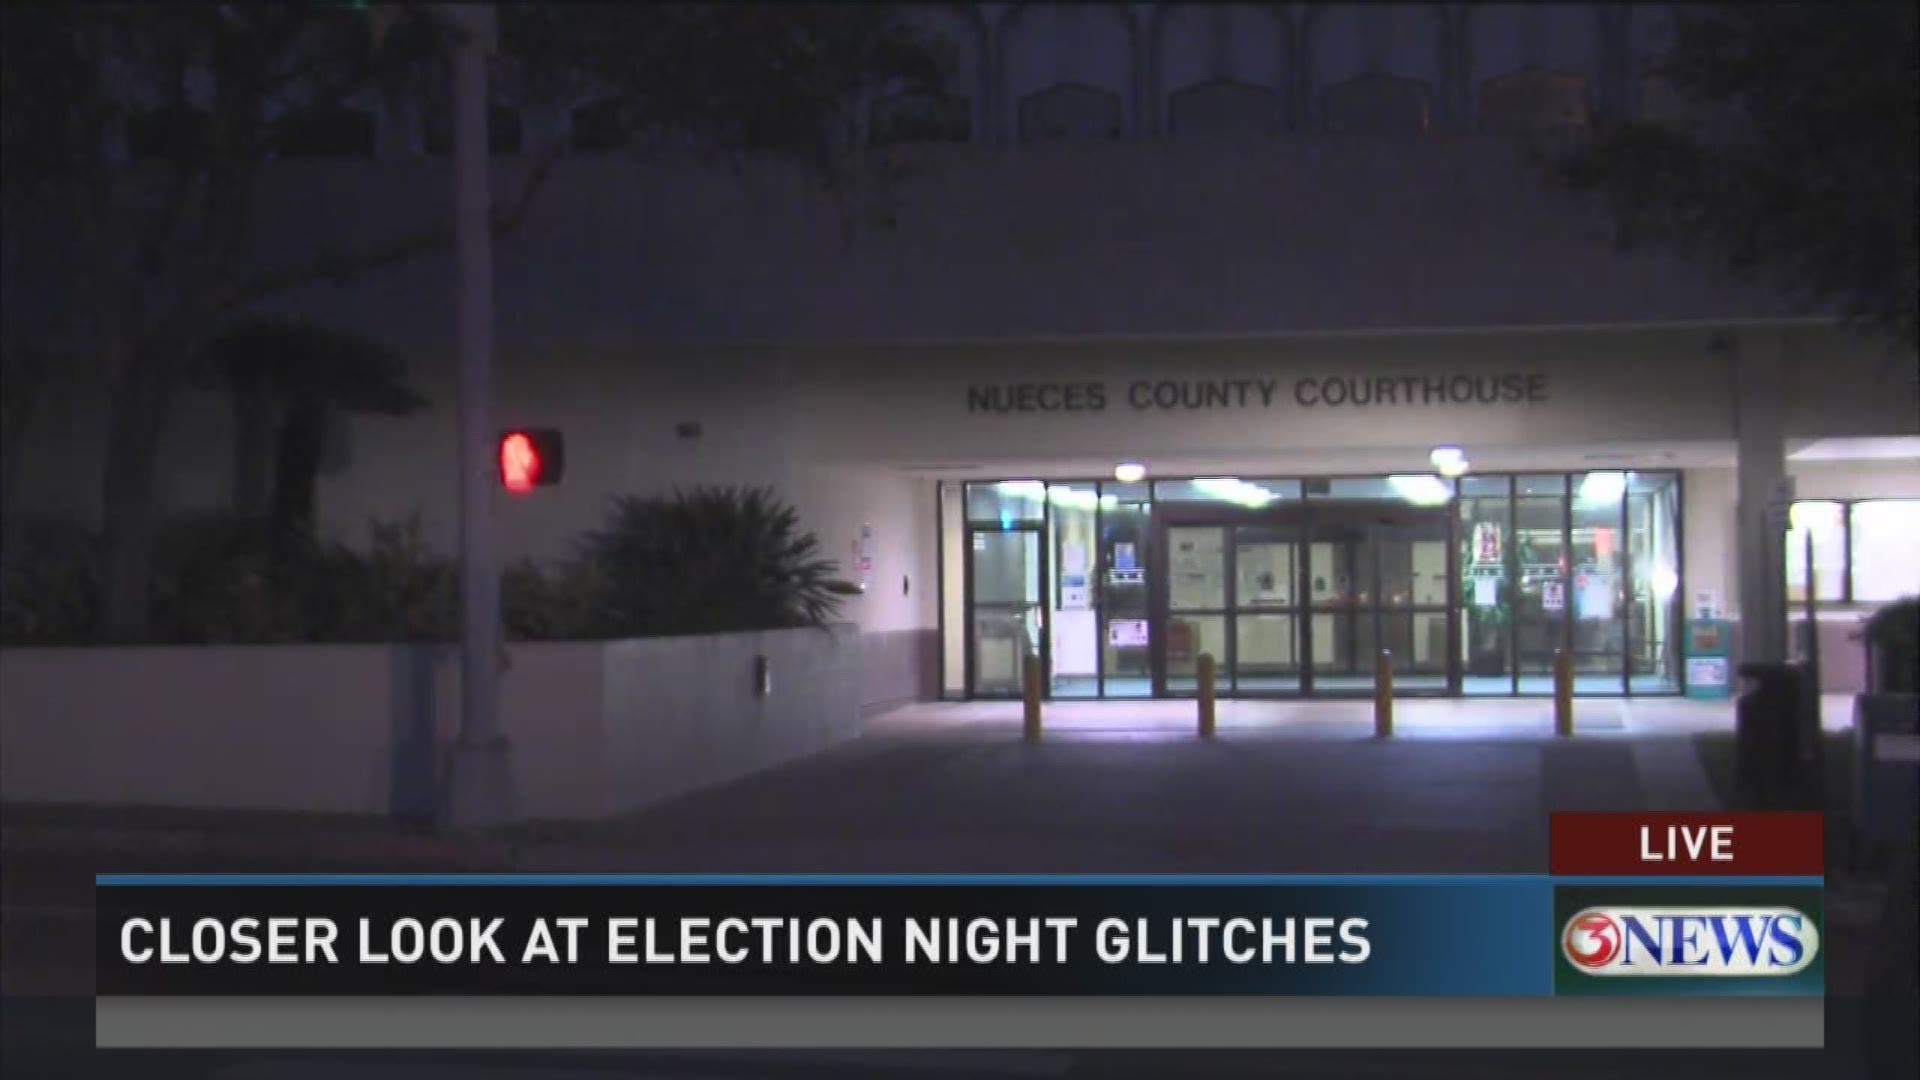 There were delays and a few glitches on election night, but in the end, Nueces County got its election returns out and finalized just after midnight.